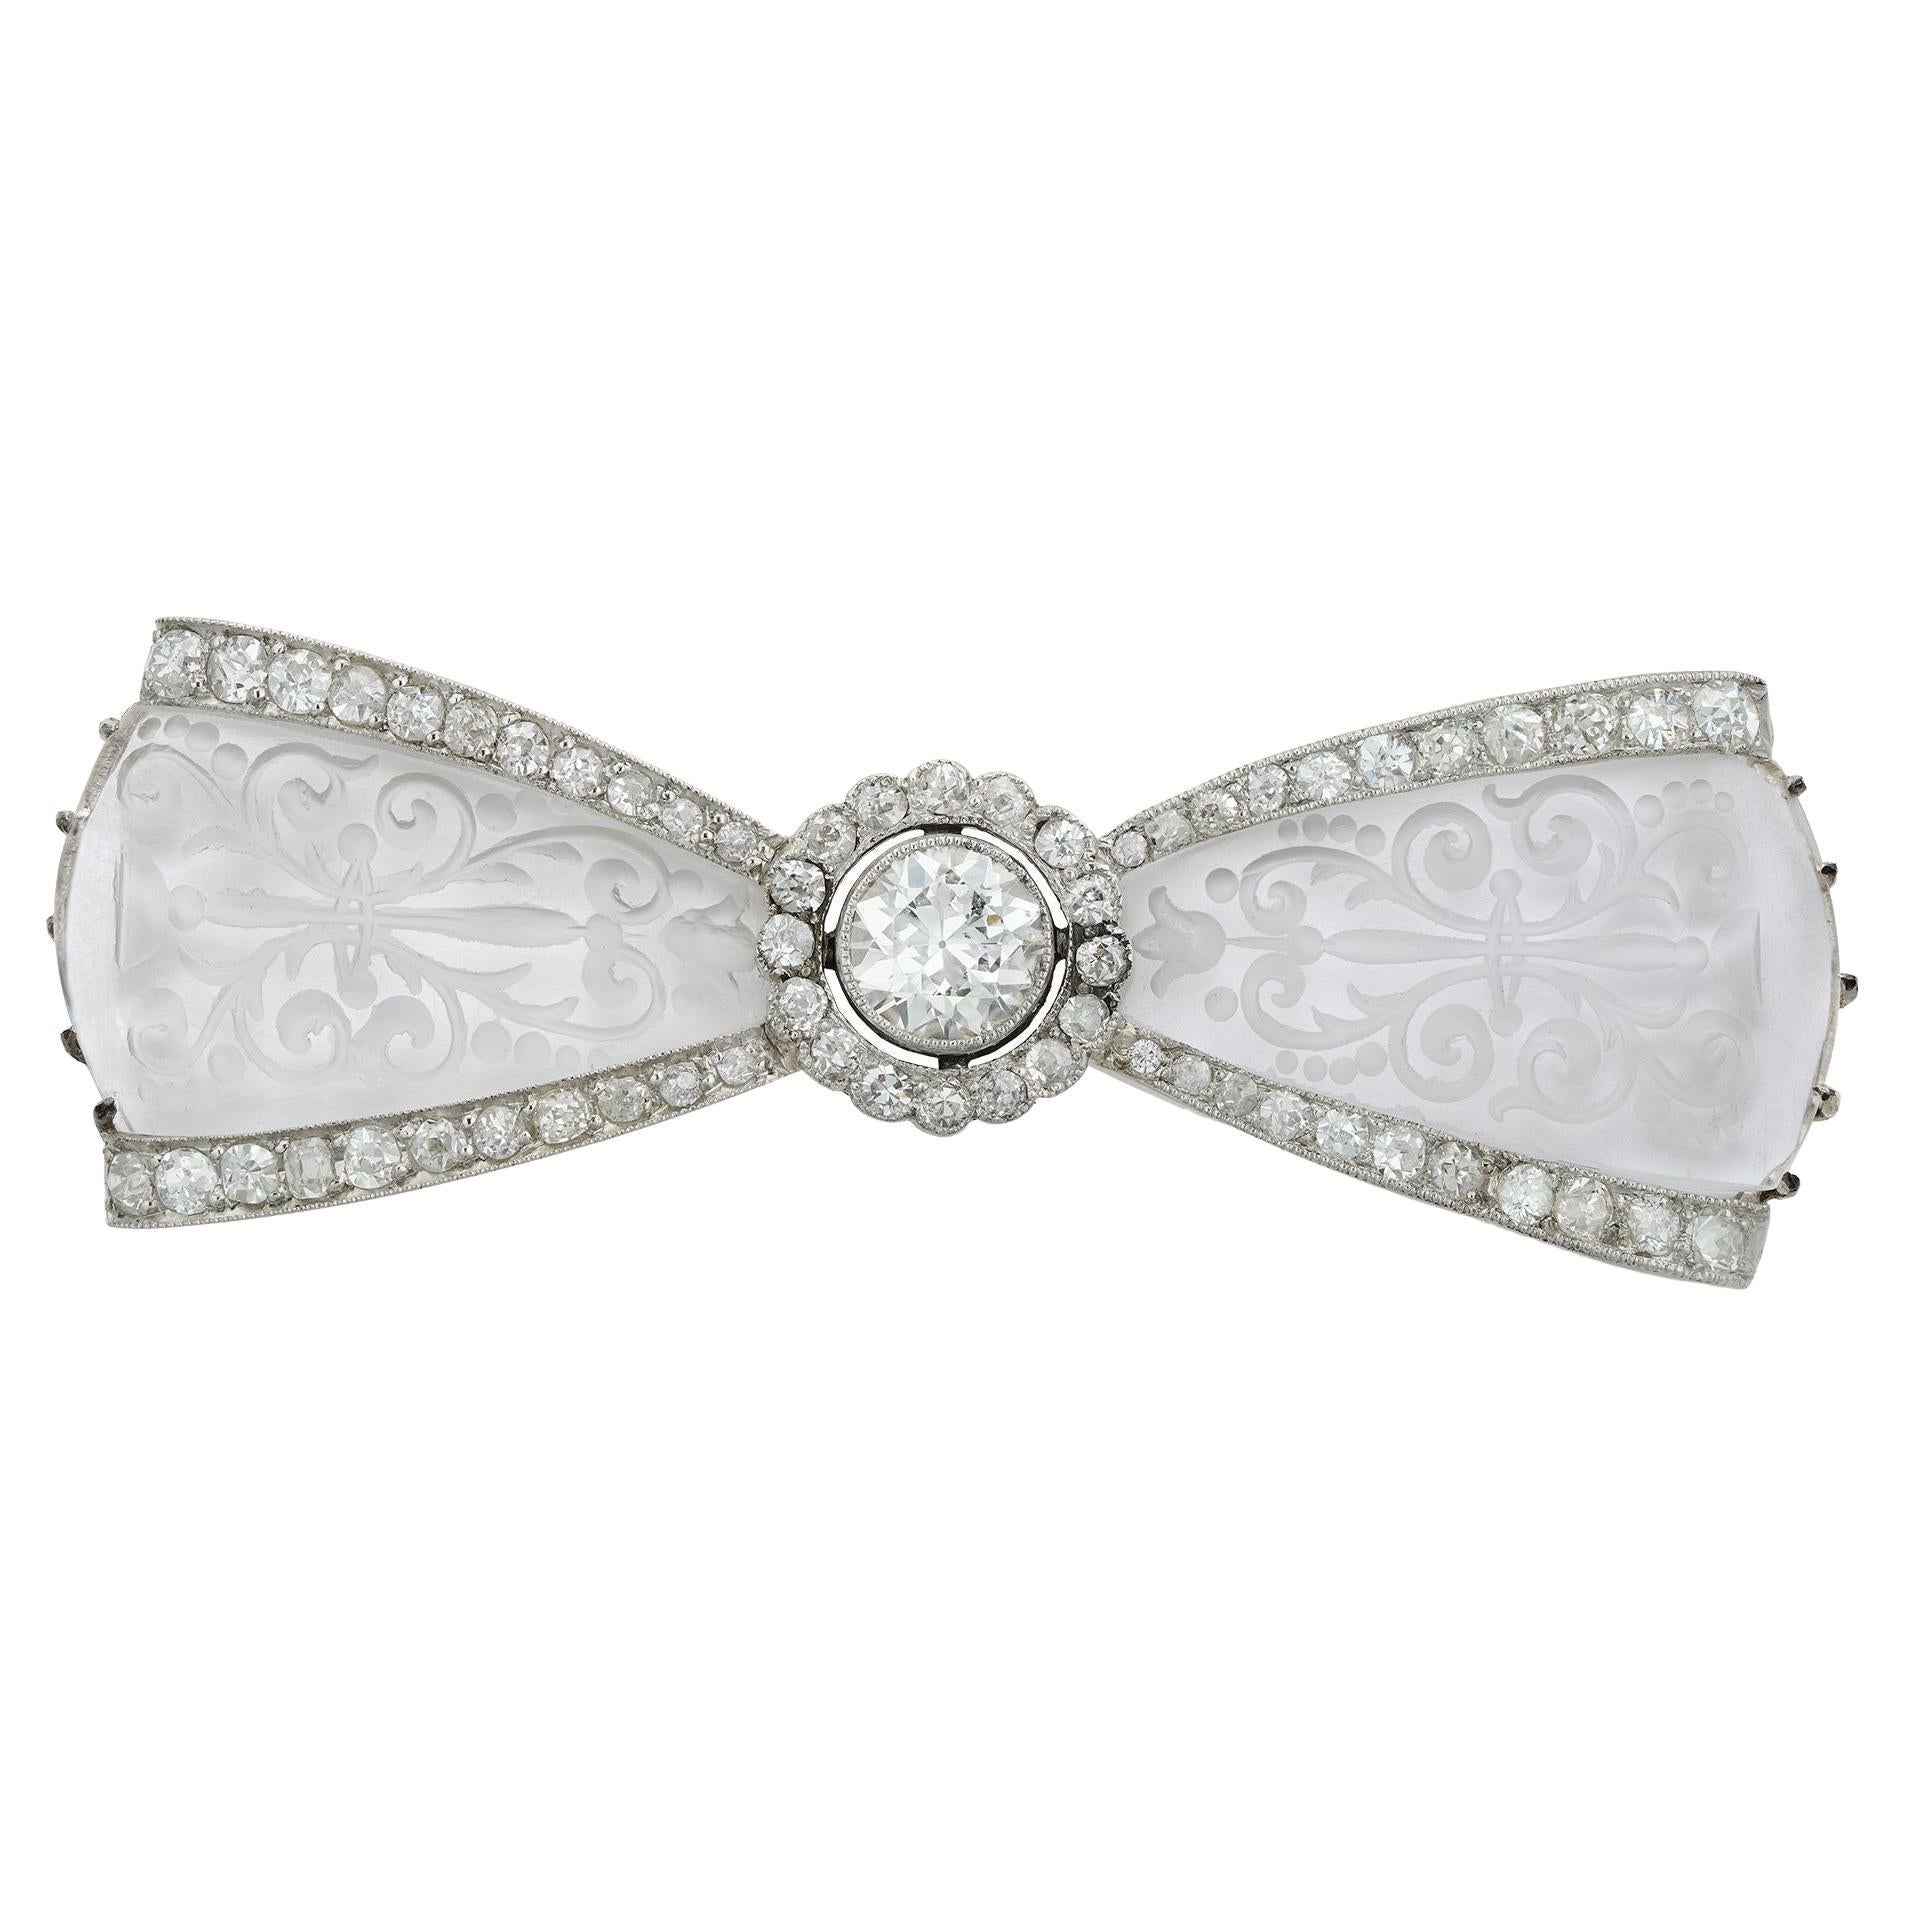 Rock Crystal and Diamond Bow Brooch by Ernst Paltscho